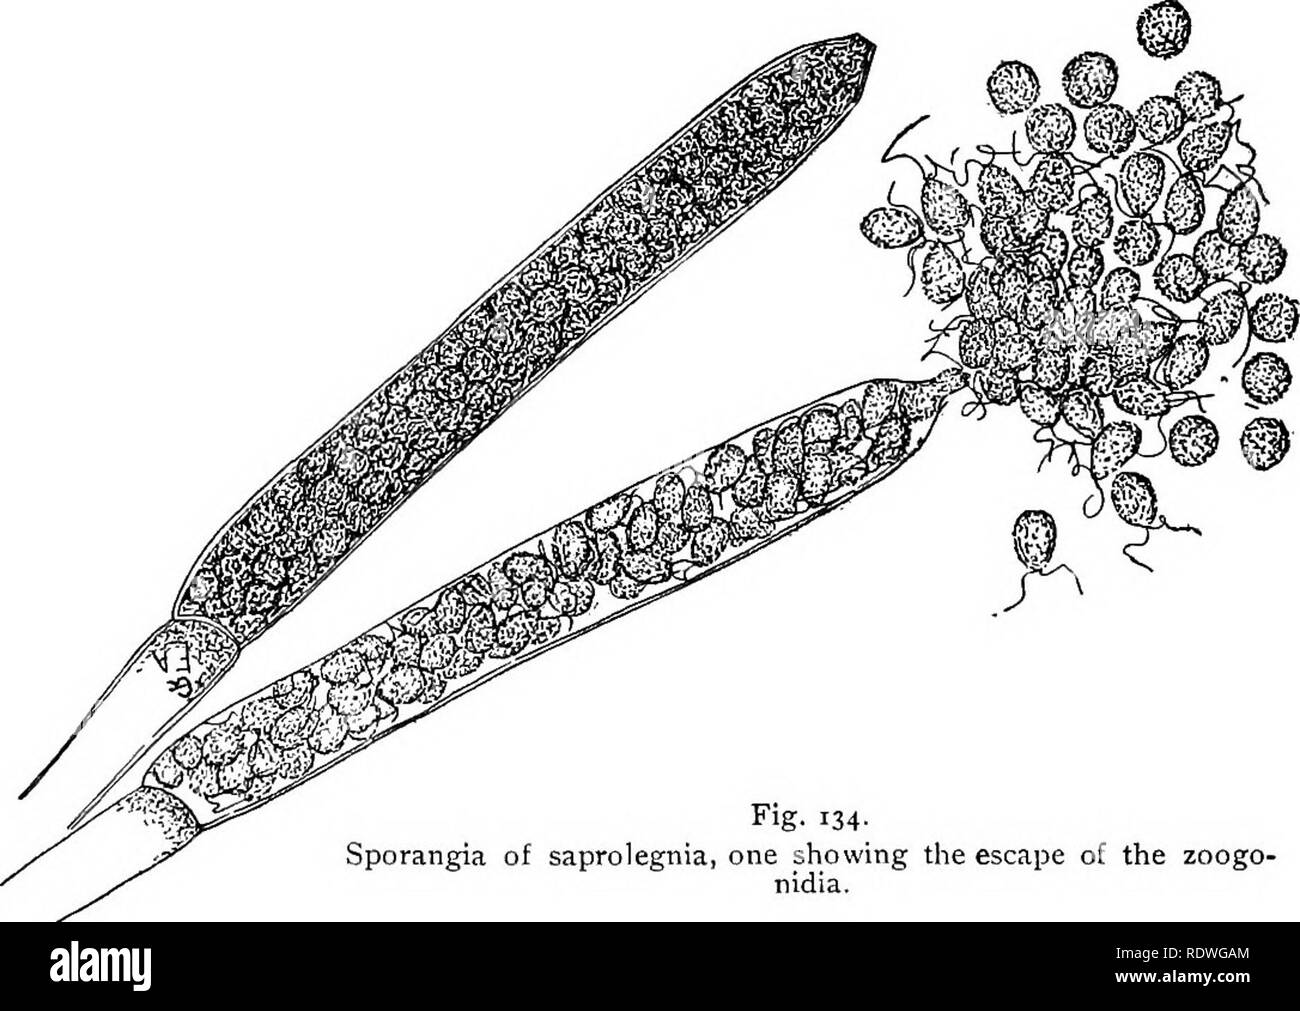 . Elementary botany. Botany. 124 MORPHOLOGY. ordinary threads of the mycelium. Some of the threads should be mounted in fresh water. Search for some of those which. Fig. 134- Sporangia of saprolegnia, one showing the escape of the zoogo- nidia. show that the protoplasm is divided up into a great number of small areas, as shown in fig. 134. With the low power we should watch some of the older ap- pearing ones, and if after a few minutes they do not open, other preparations should be made. 282. Zoogonidia of saprolegnia.—The sporangium opens at. Please note that these images are extracted from s Stock Photo